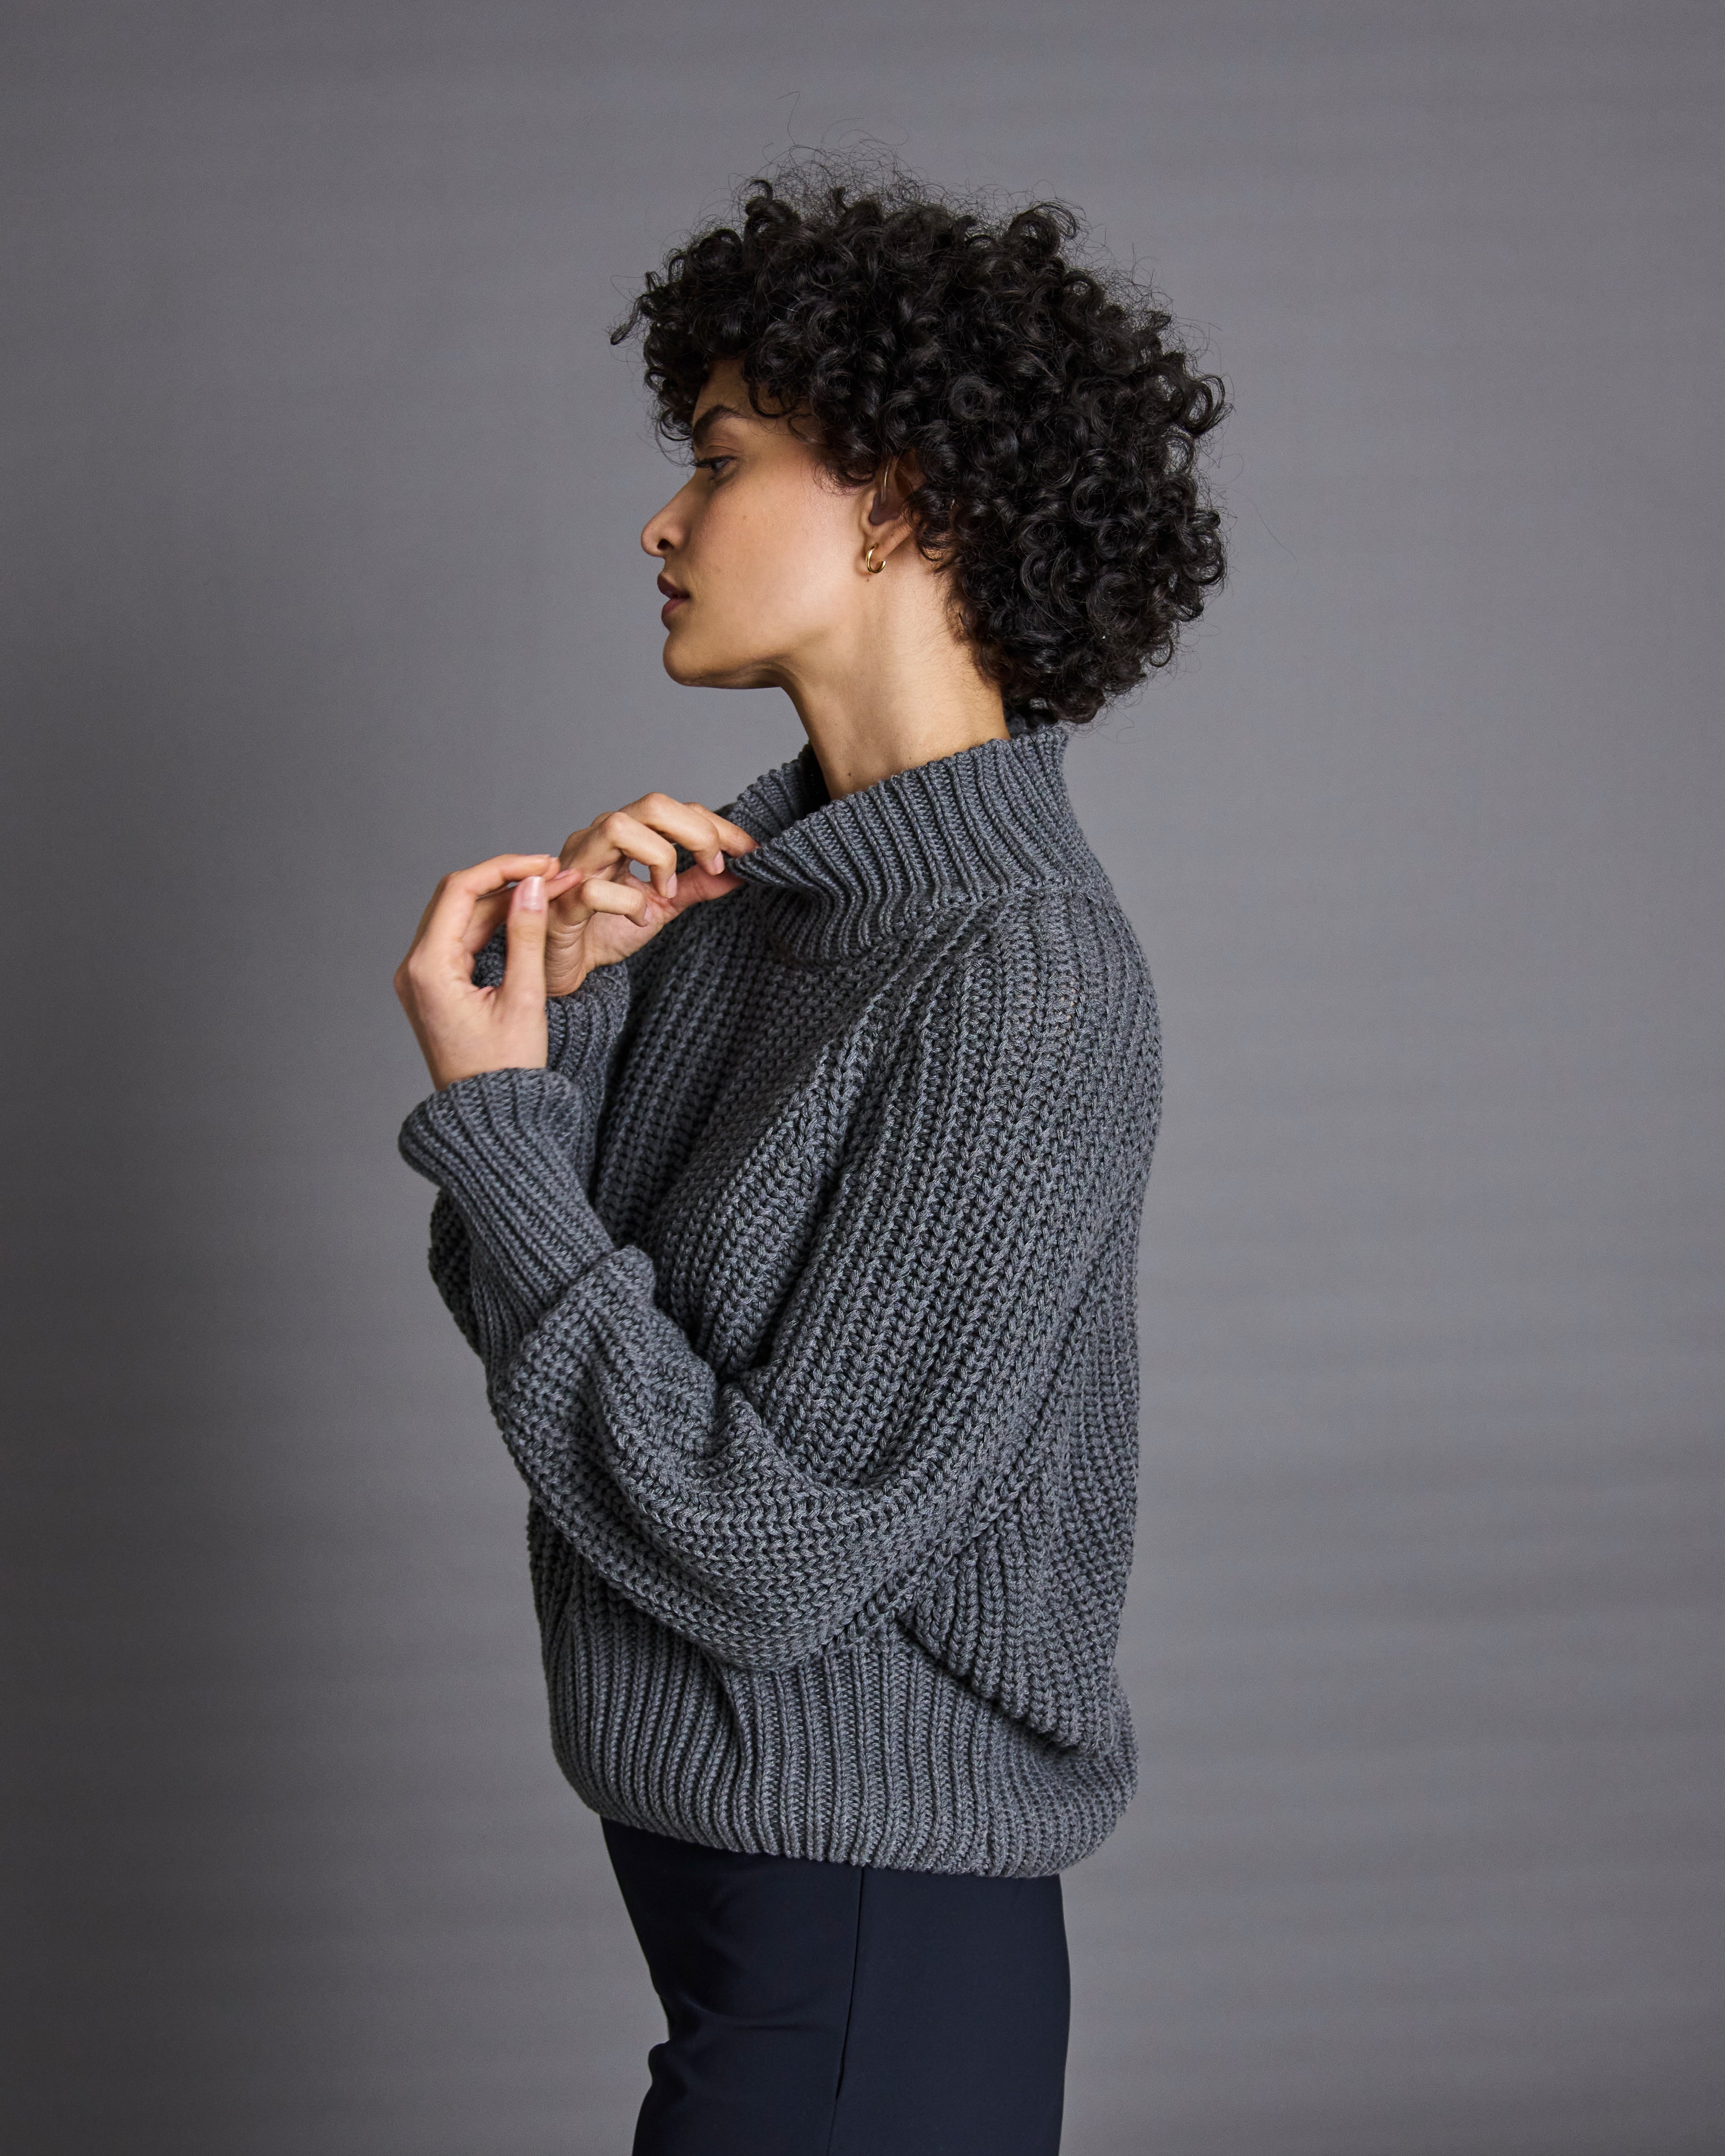 jan n june, dark grey chunky knit sweater, mockneck, turtleneck, oversized fit, sustainable, ethical, womens apparel, curate